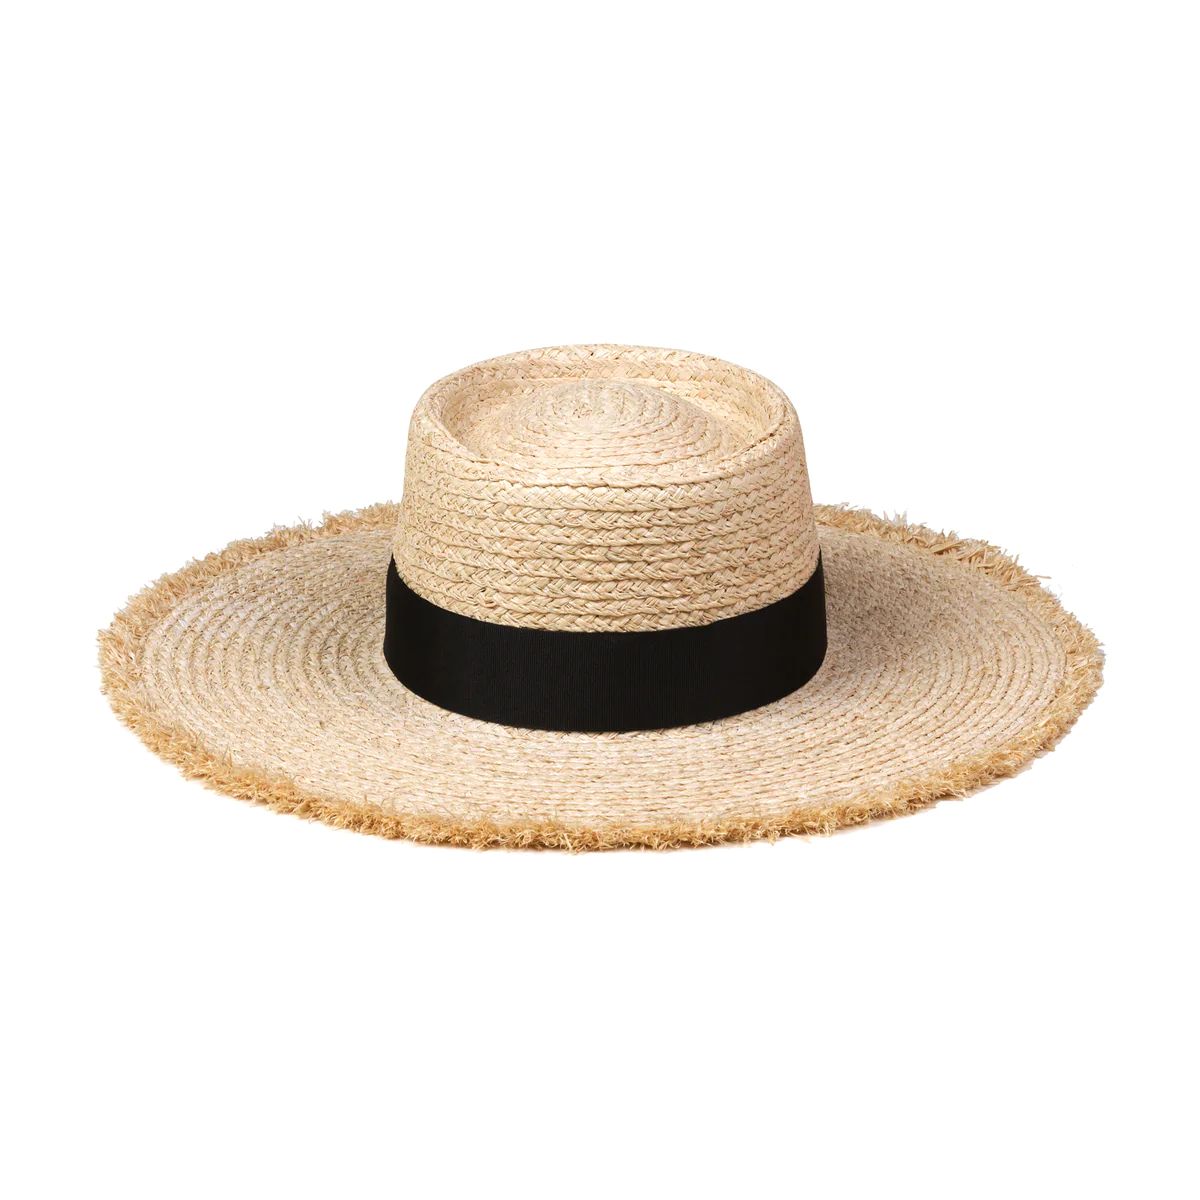 The Ventura - Straw Boater Hat in Natural | Lack of Color US | Lack of Color